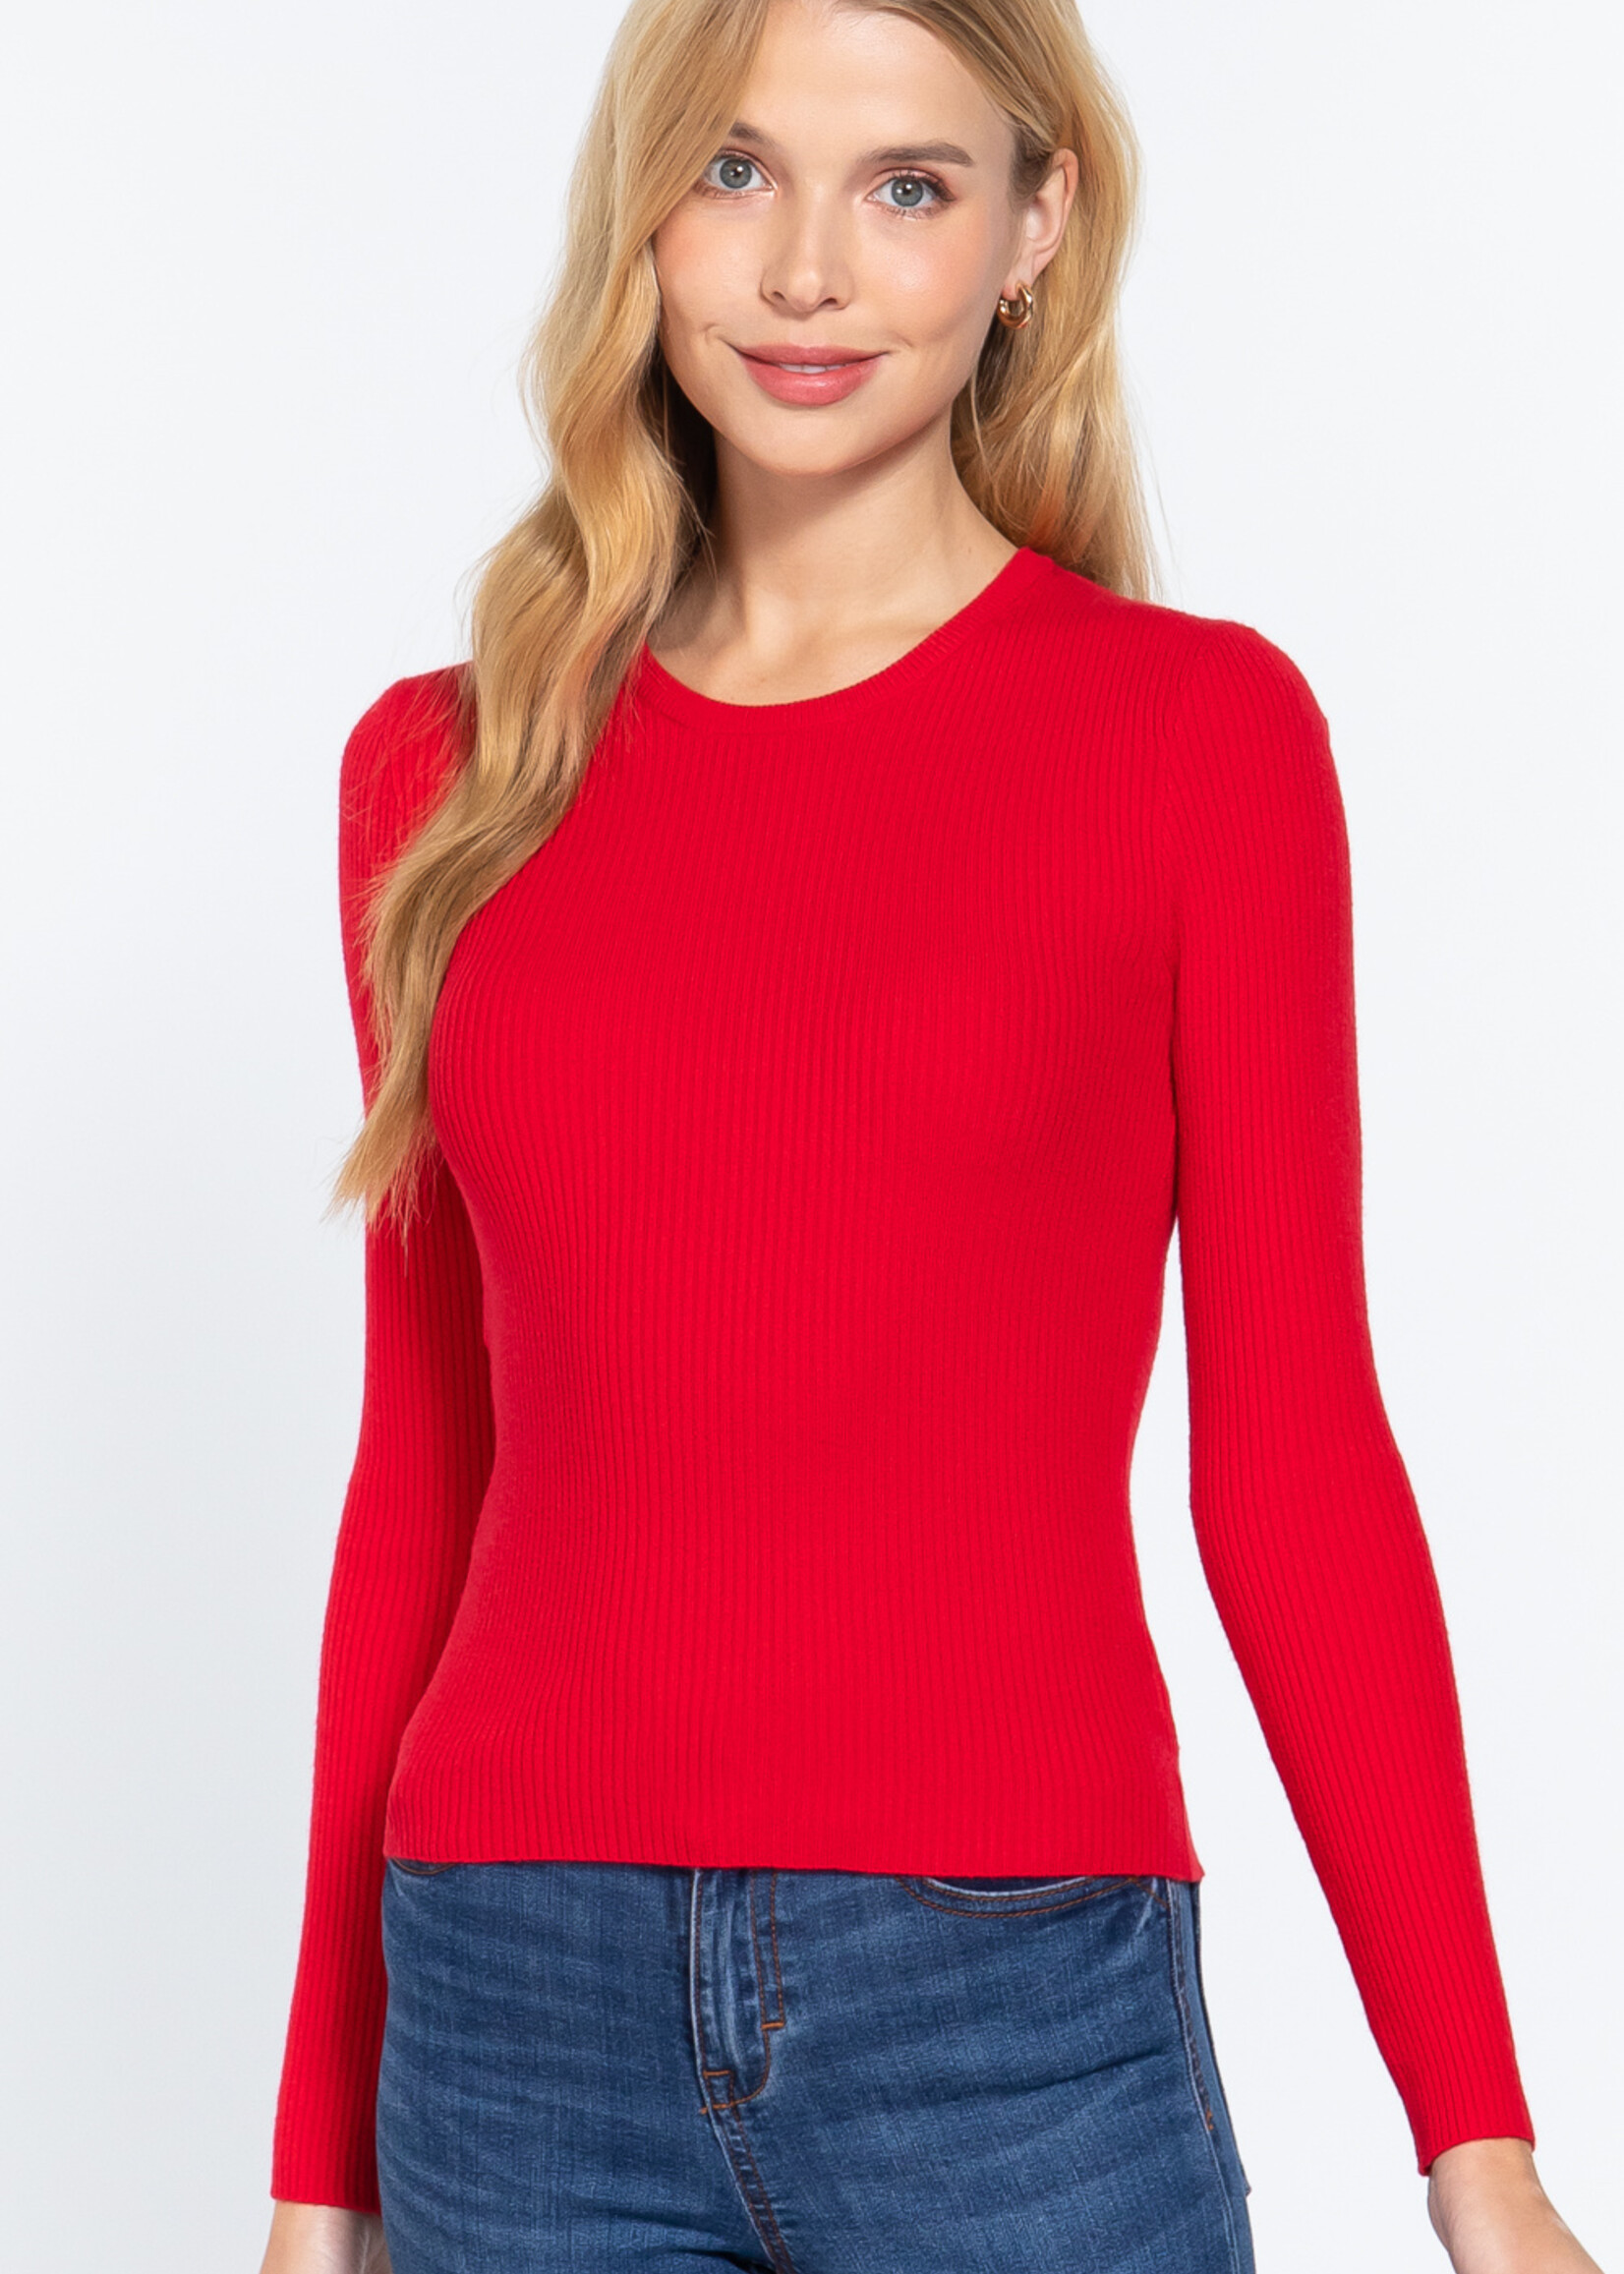 ACTIVE USA, INC. Active USA LONG SLEEVE CREW NECK fitted Rib Sweater top  - SW12227